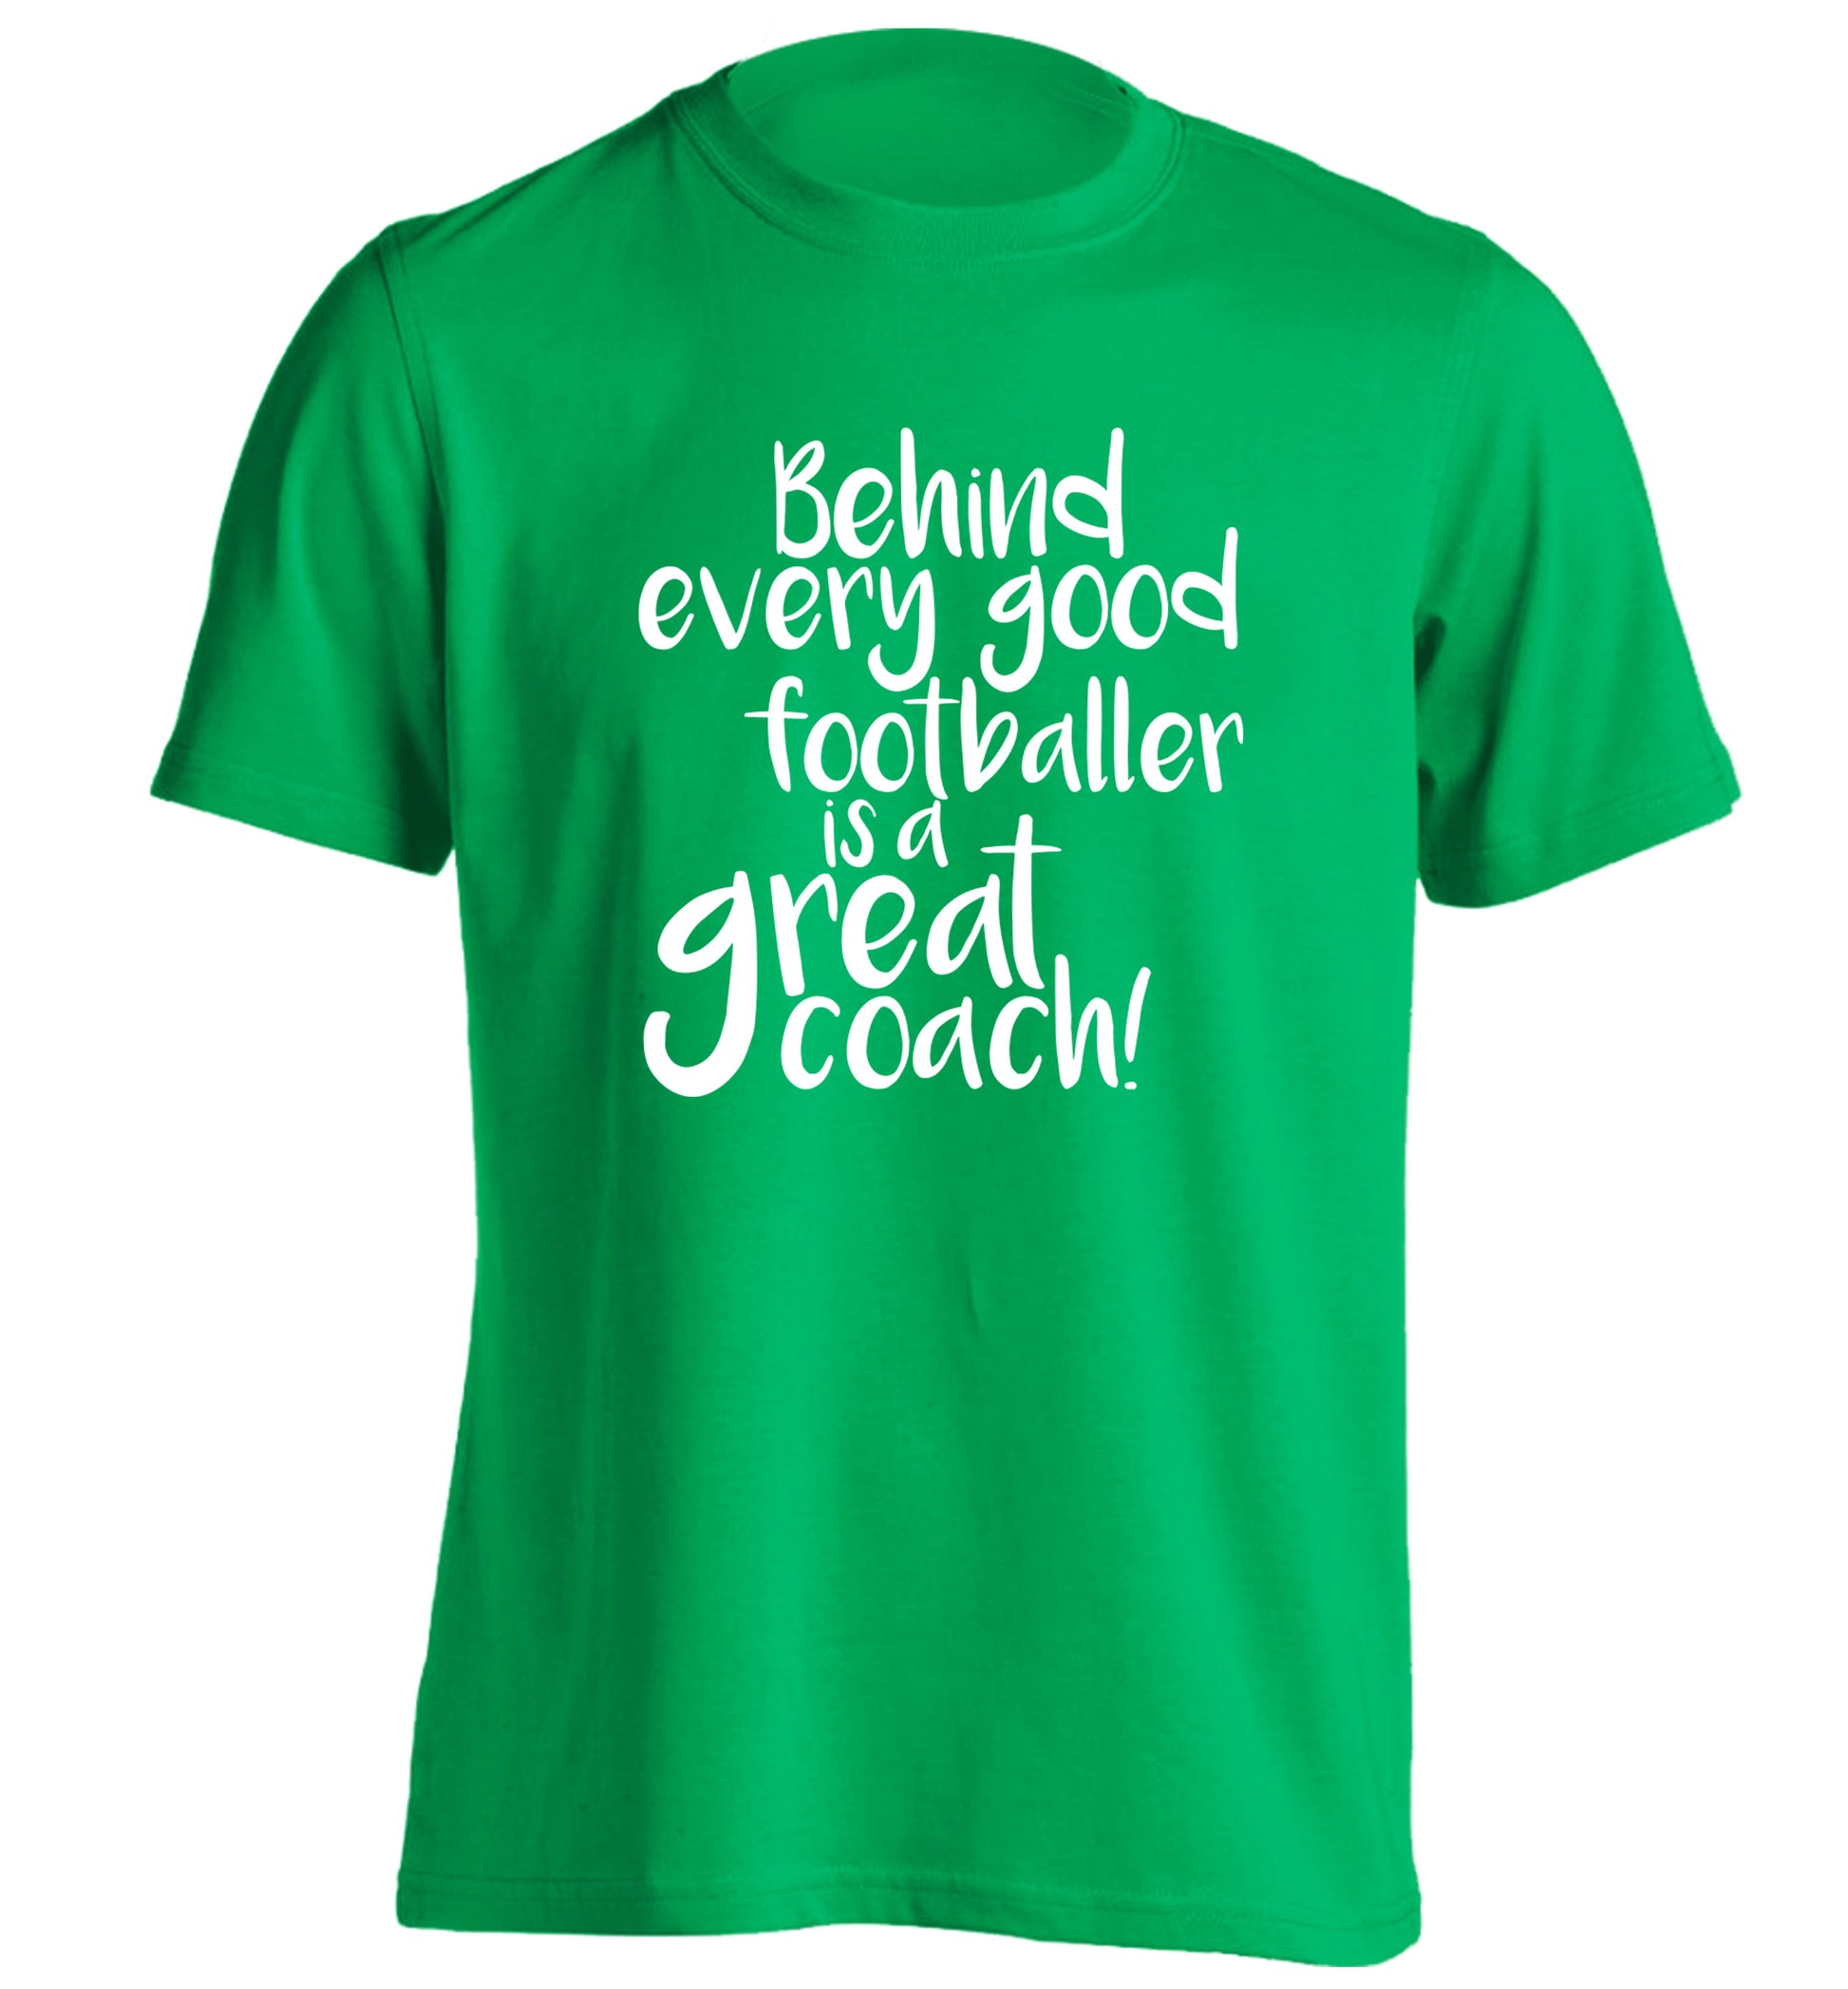 Behind every good footballer is a great coach! adults unisexgreen Tshirt 2XL